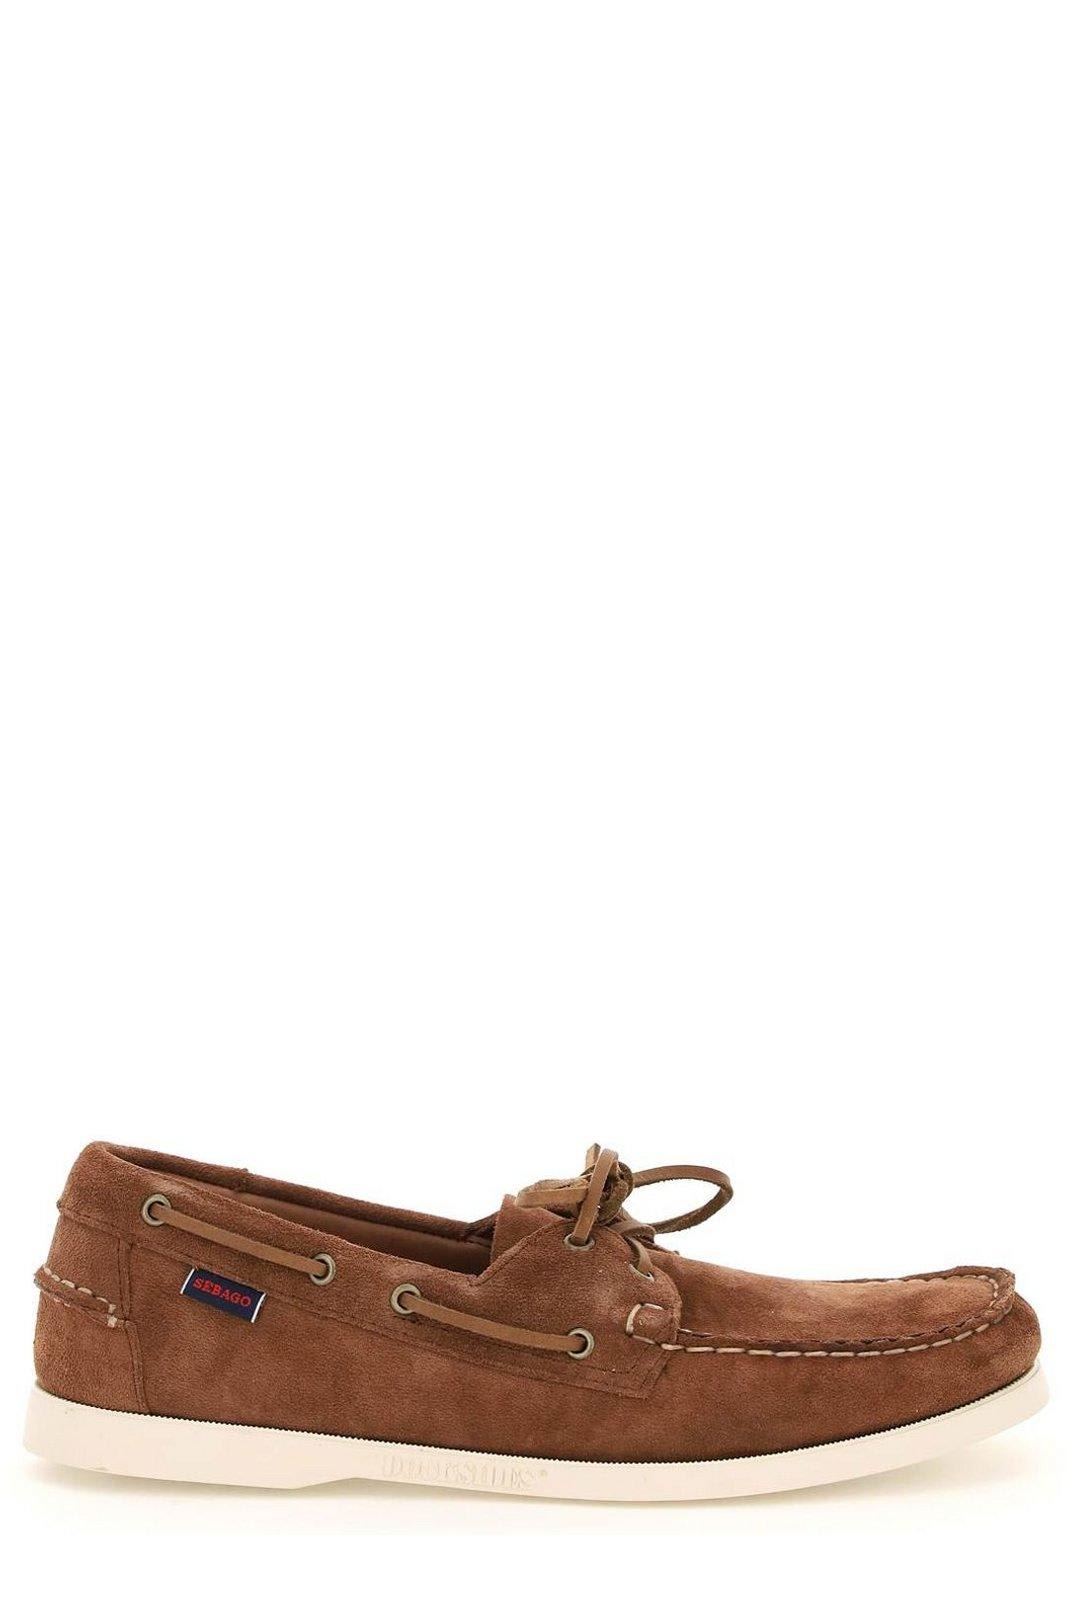 Shop Sebago Lace-up Round Toe Boat Shoes In Dark Brown